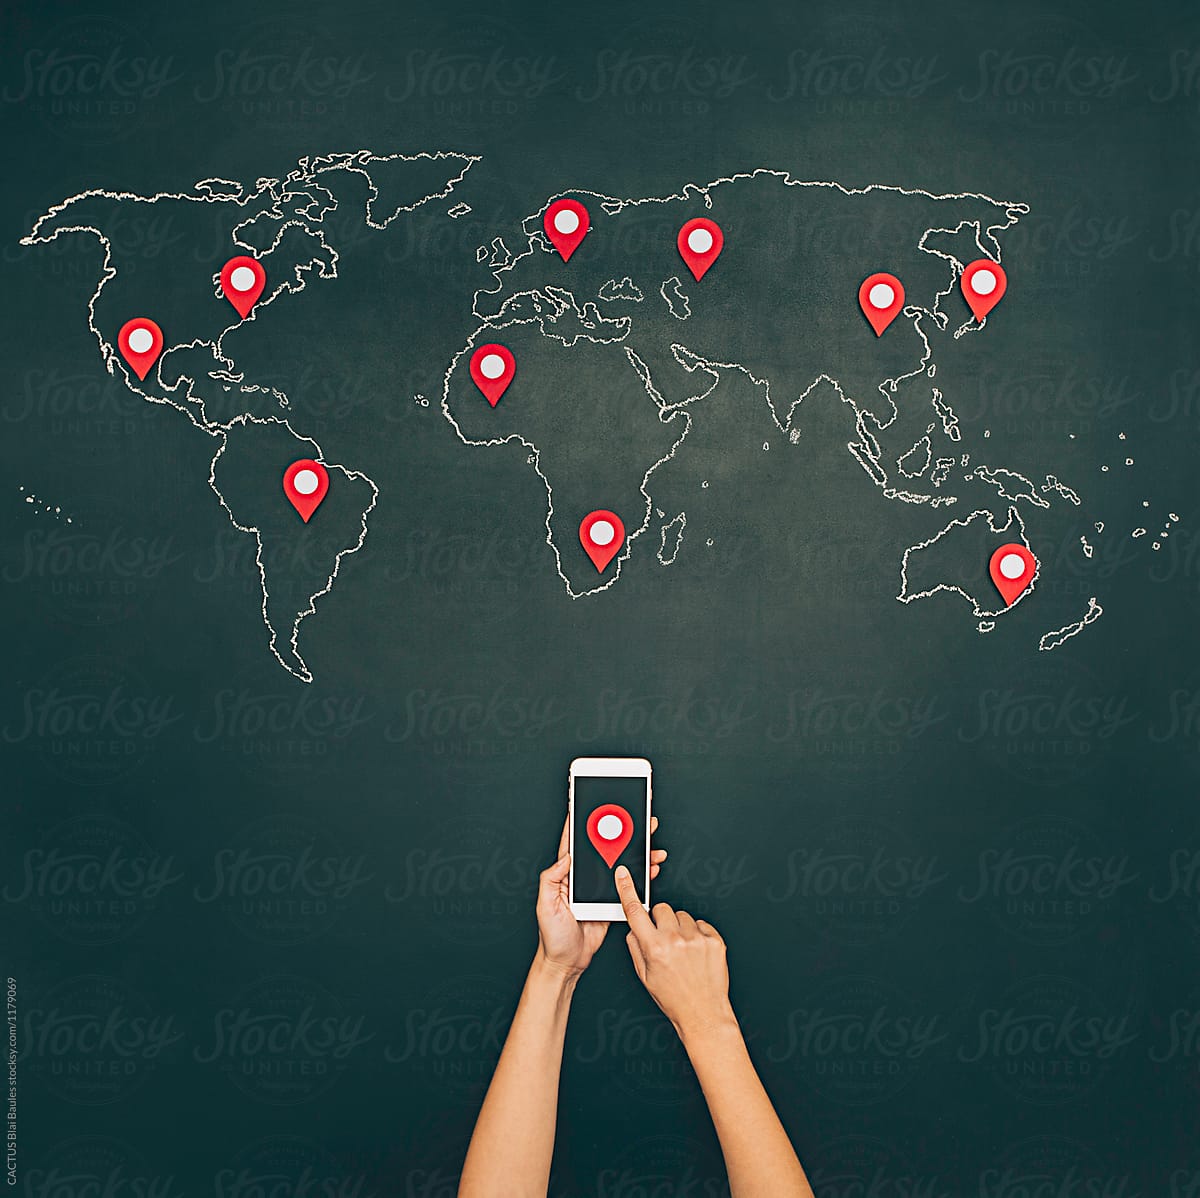 Internet search with mobile phone. World map on chalkboard with pins.